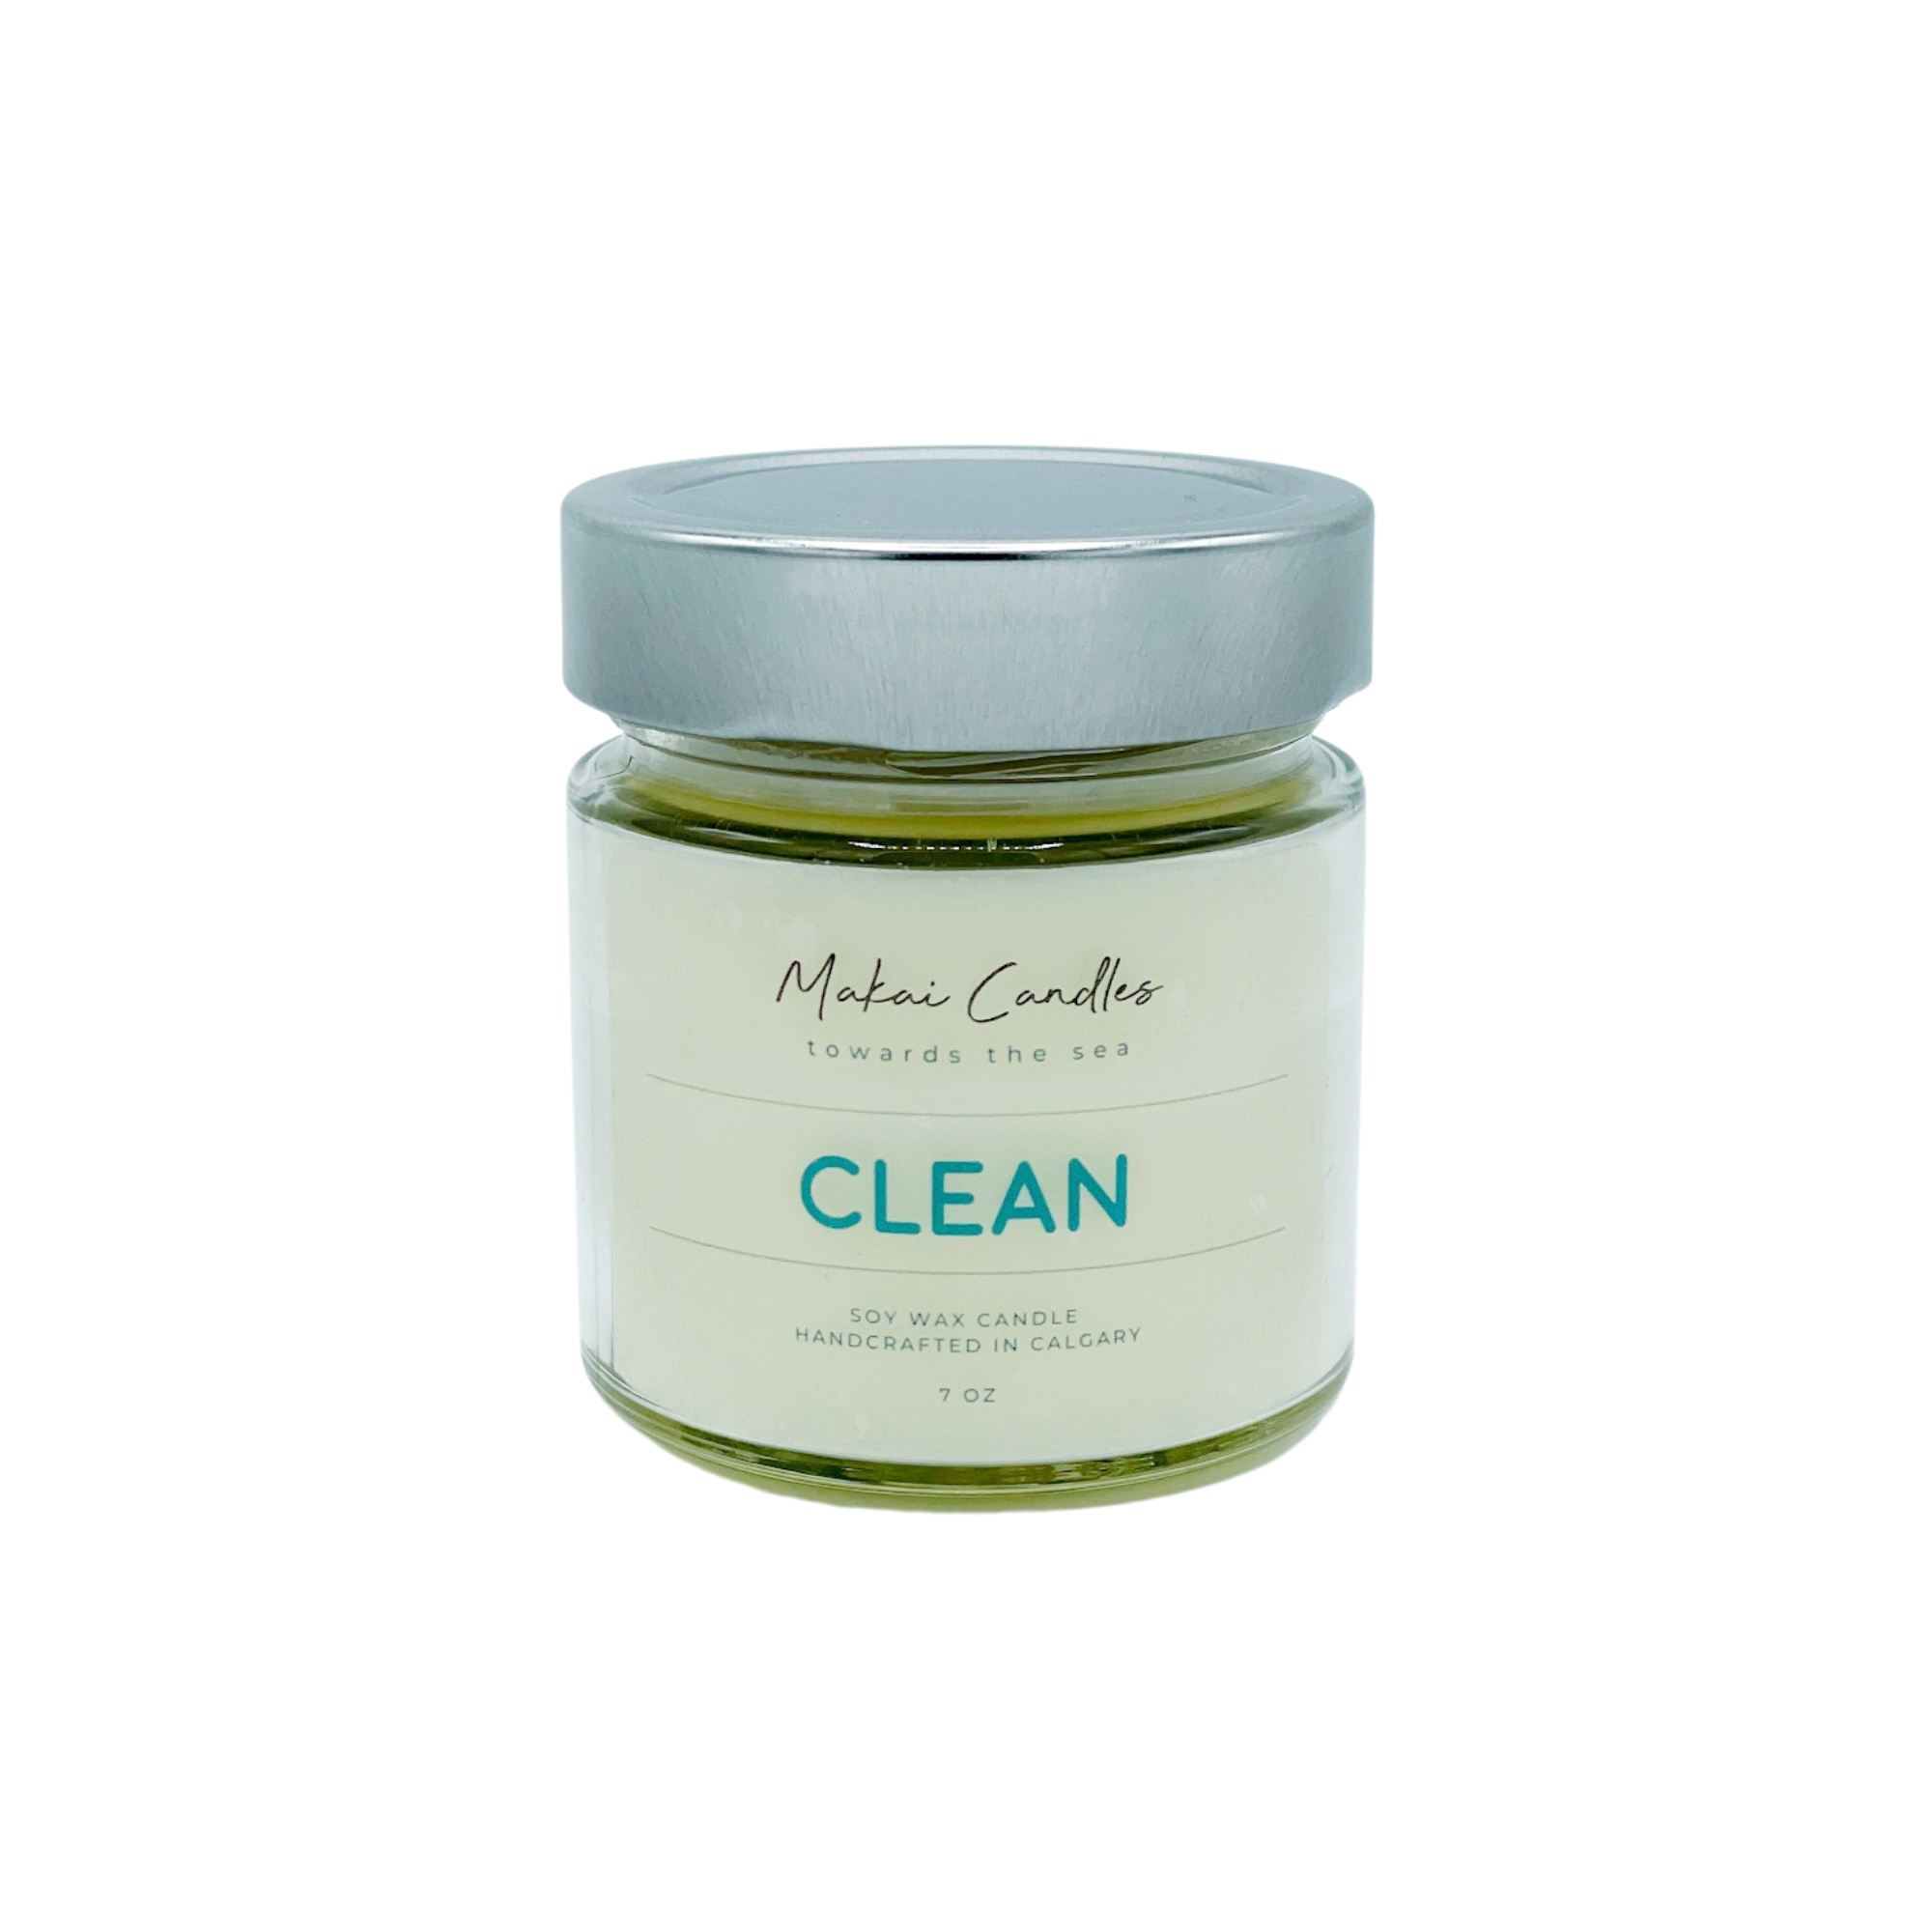 Clean soy wax candle made of ocean mist, sea grass, agave nectar and coconut milk. This is a fresh smelling candle. 